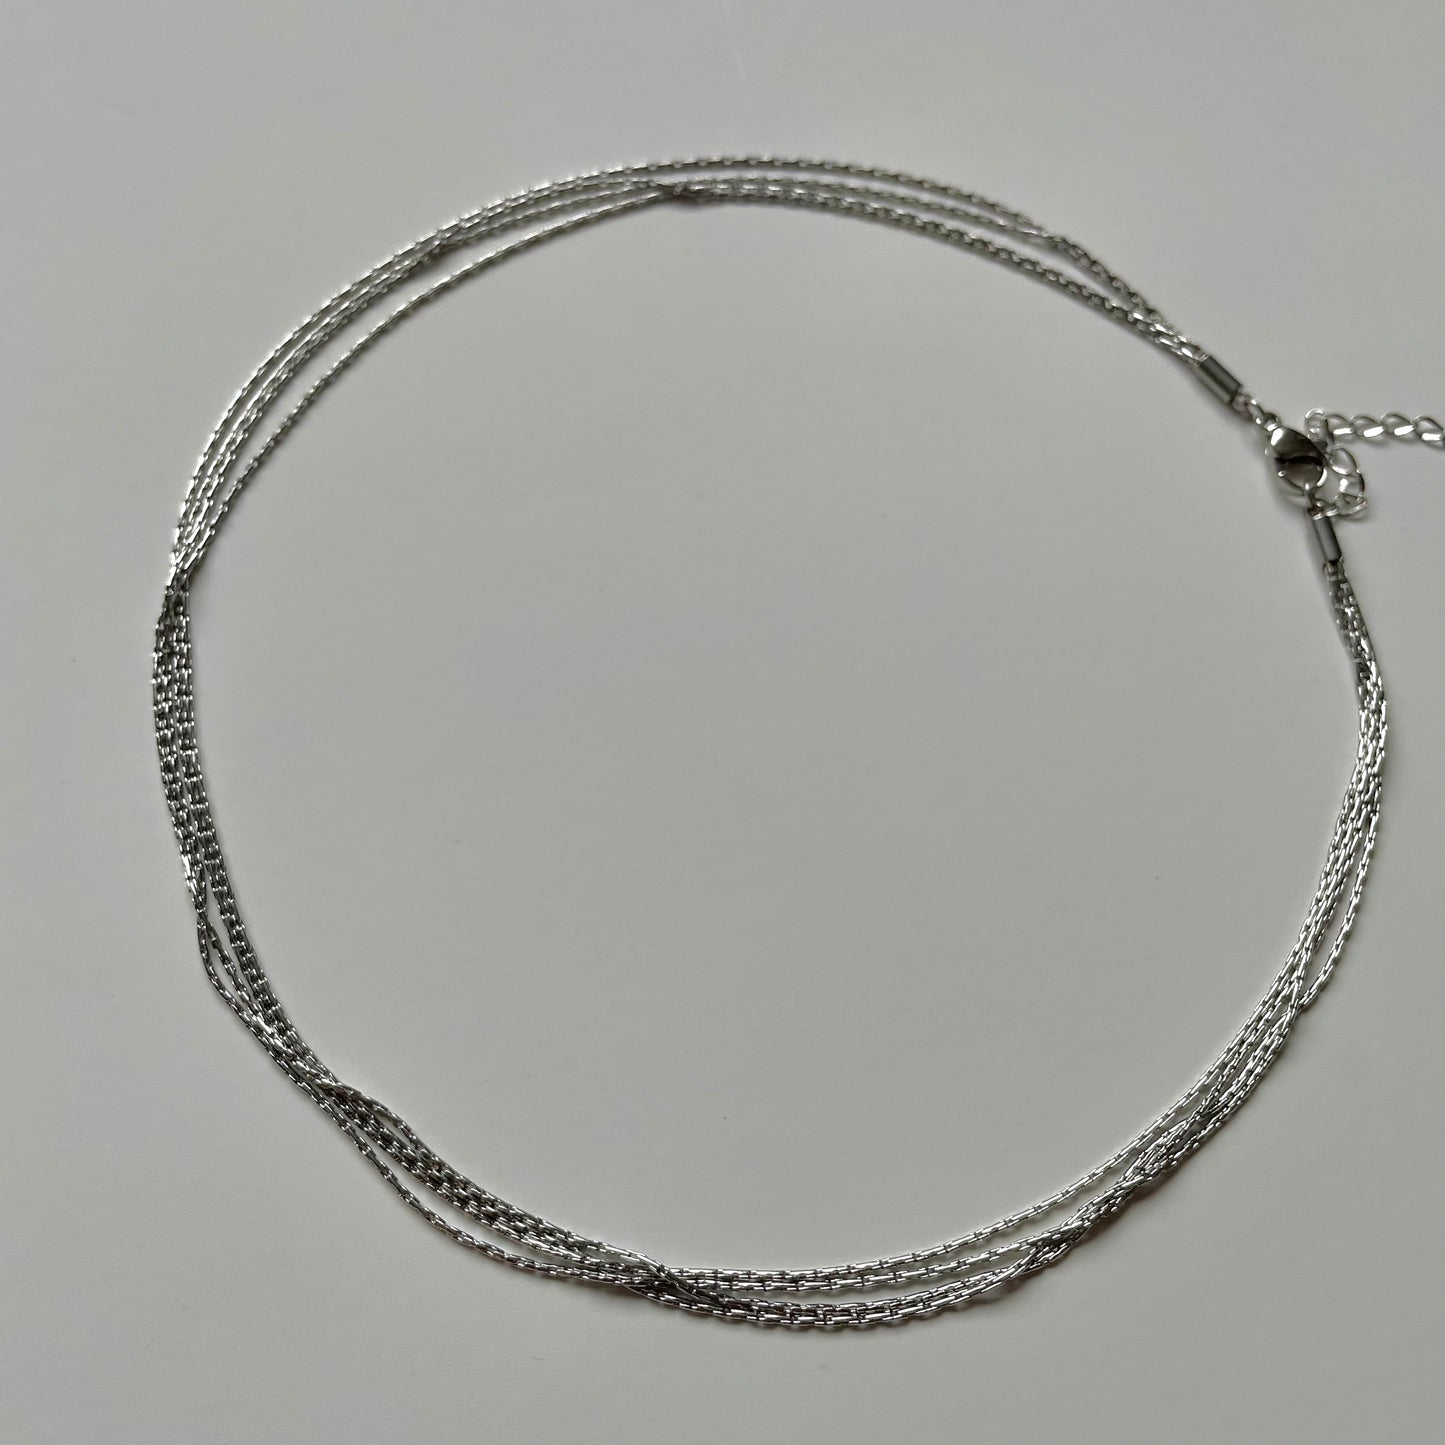 Four Layer Choker Chain Necklace- Silver